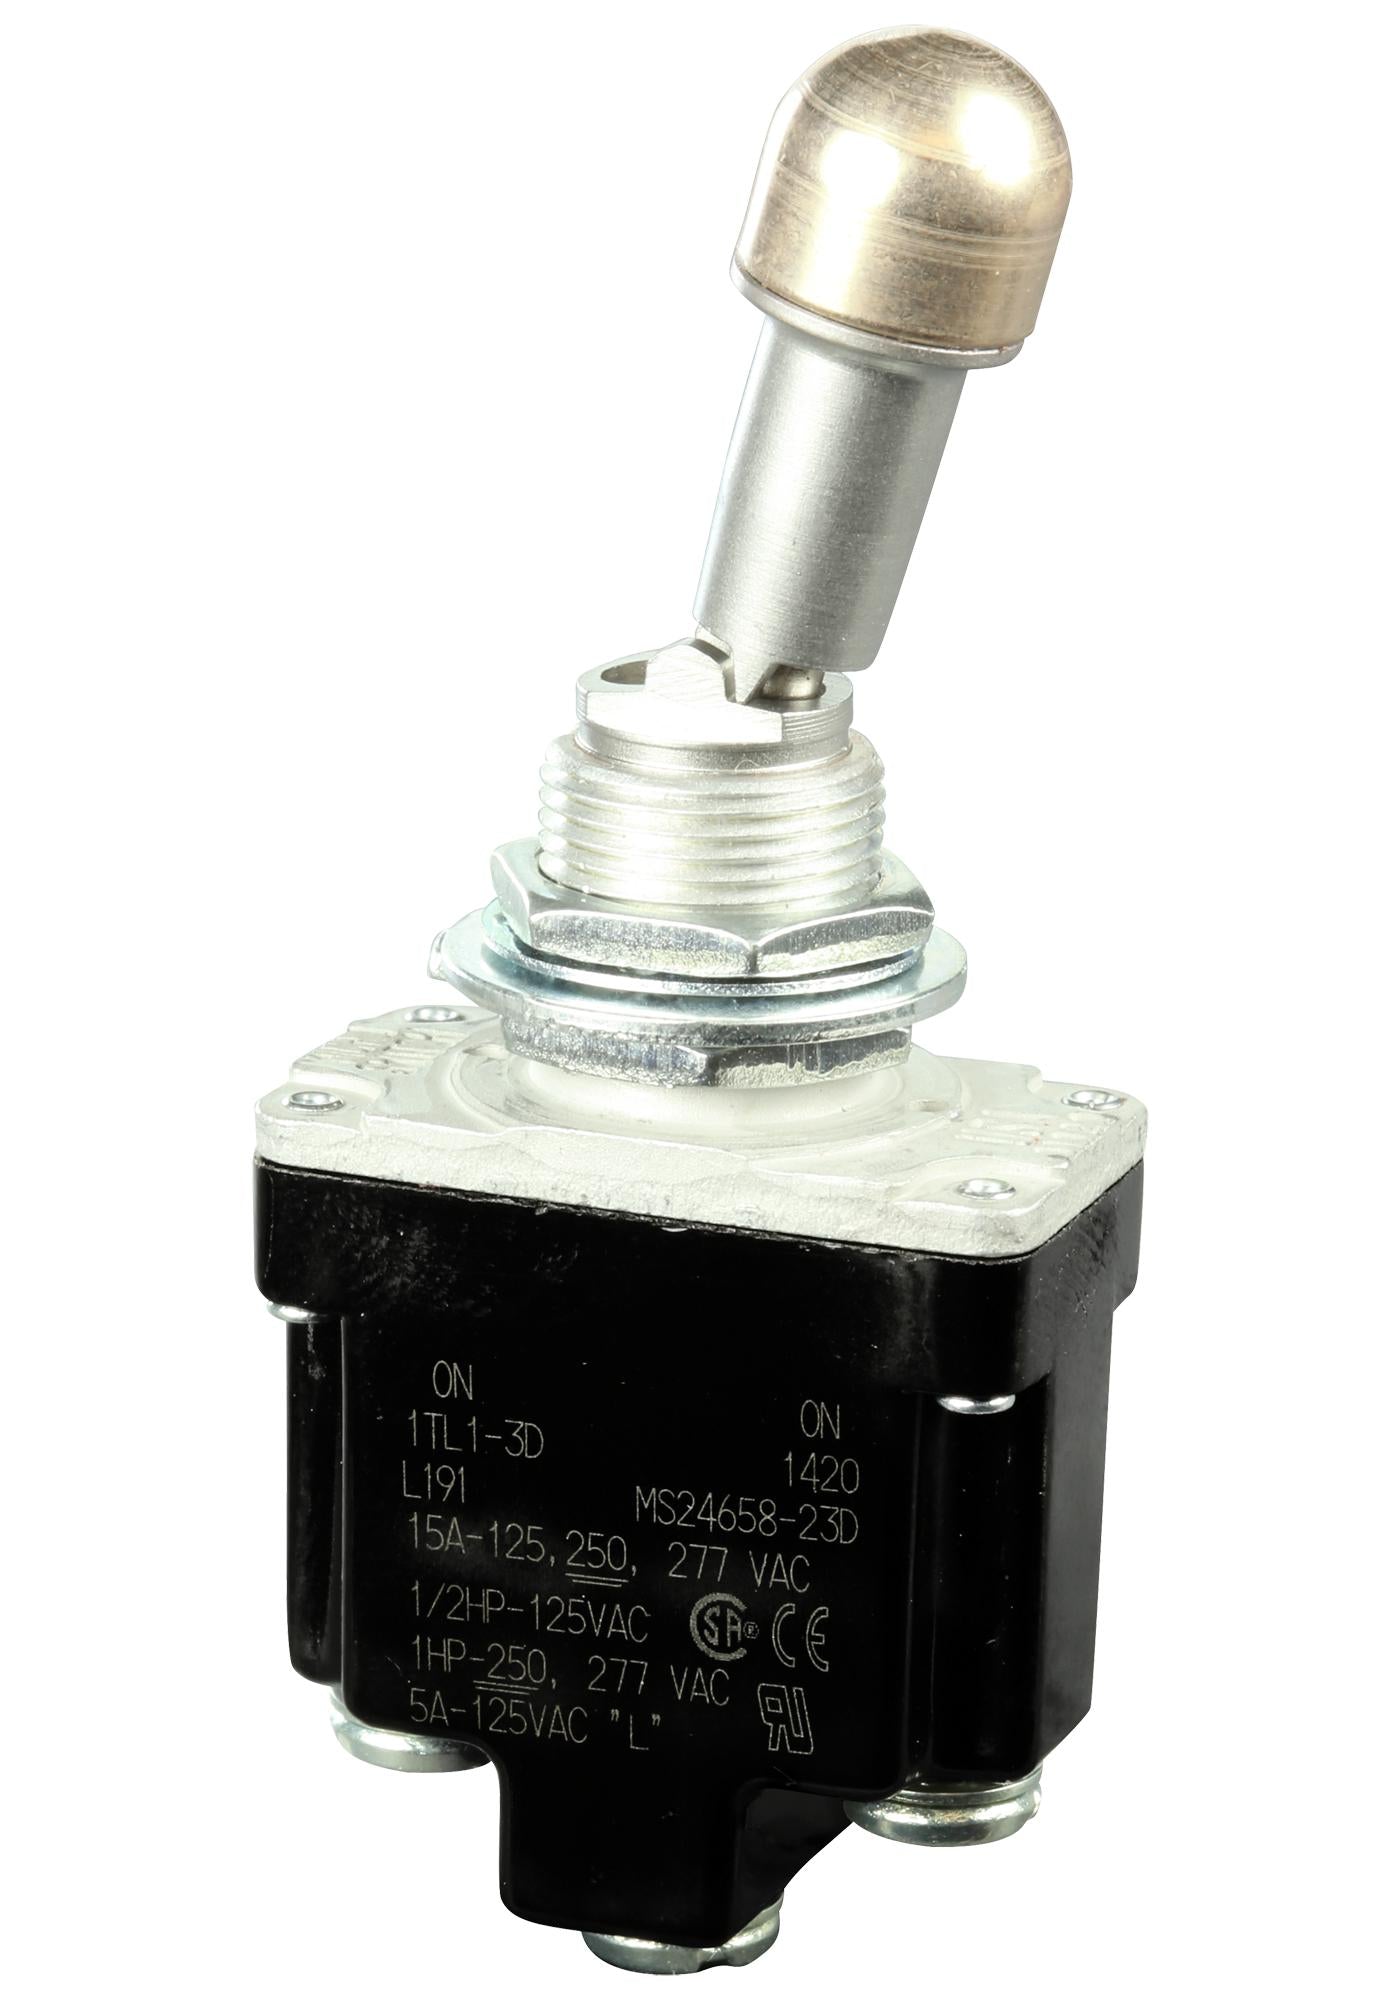 1TL1-3D TOGGLE SWITCH, 1 POLE, ON-ON HONEYWELL